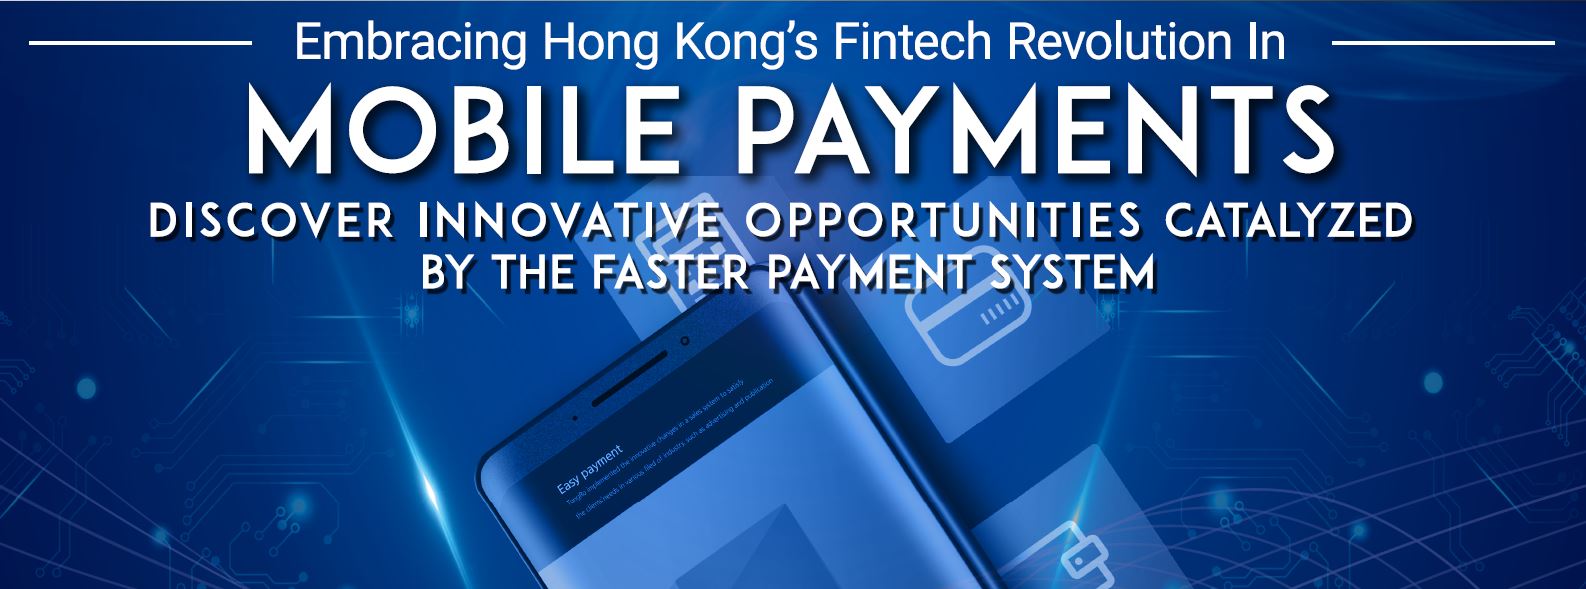 Embracing Hong Kong’s FinTech Revolution in Mobile Payments